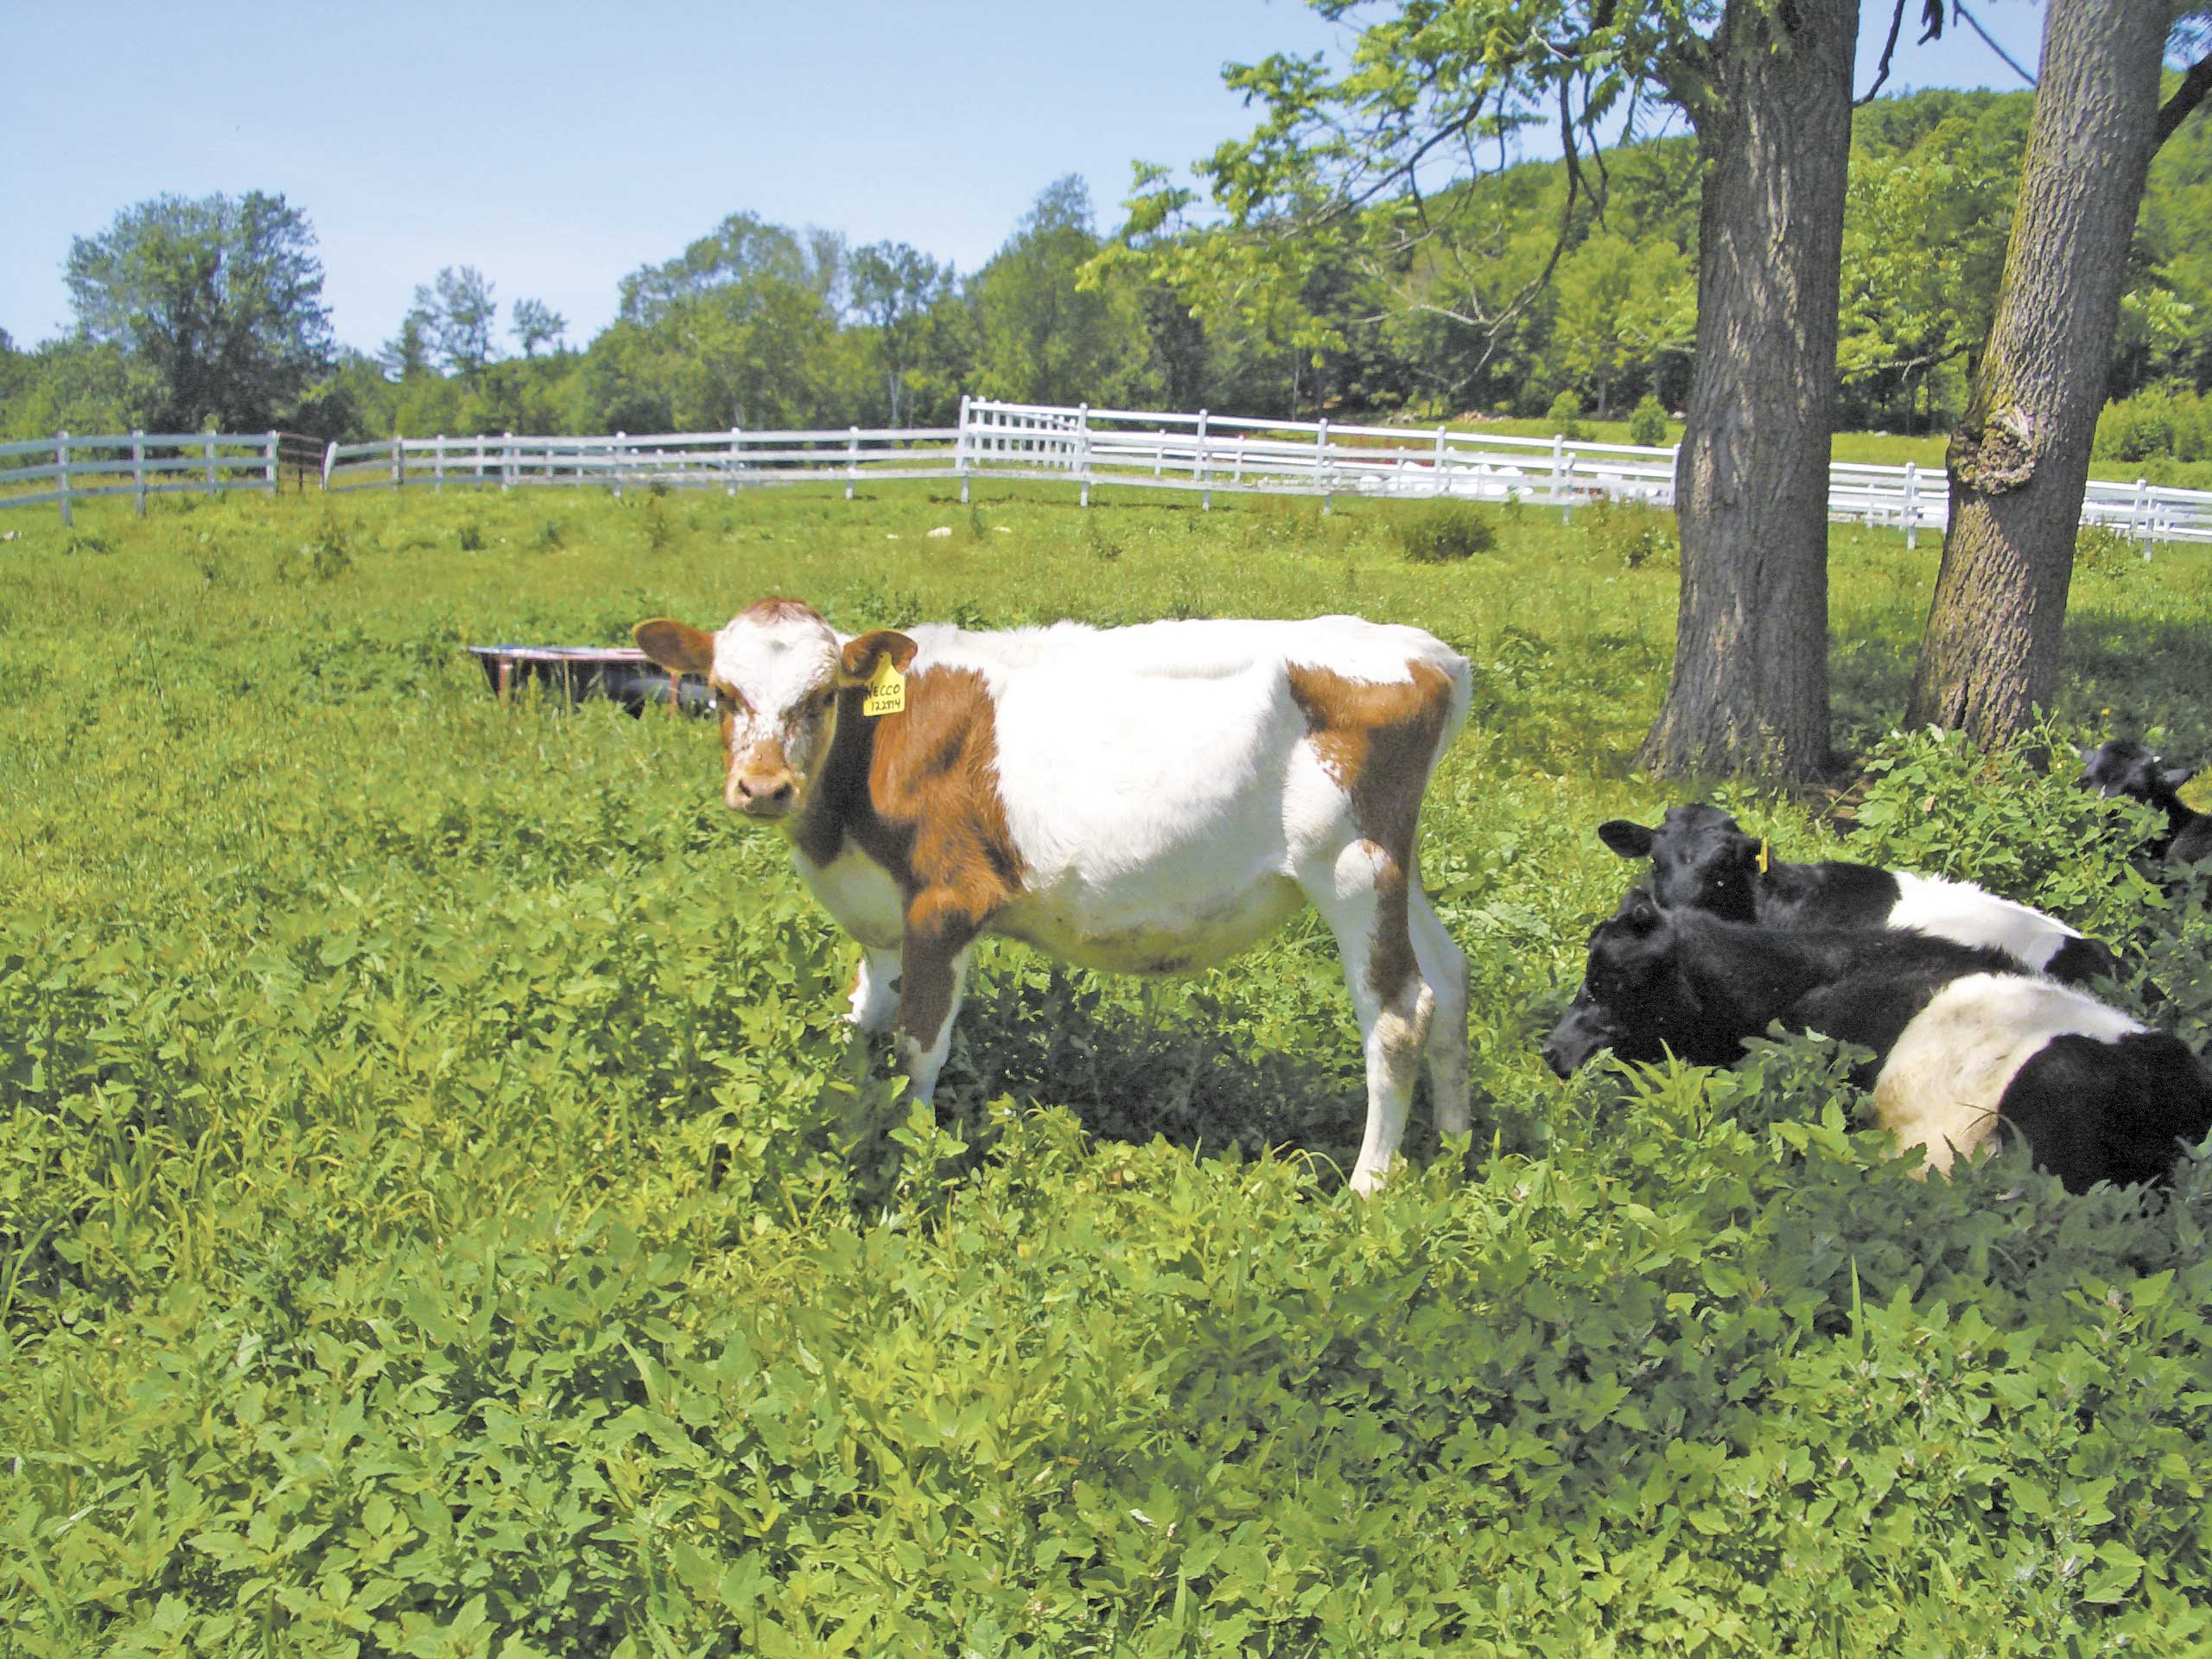 Responding to demand at Manning Hill Farm